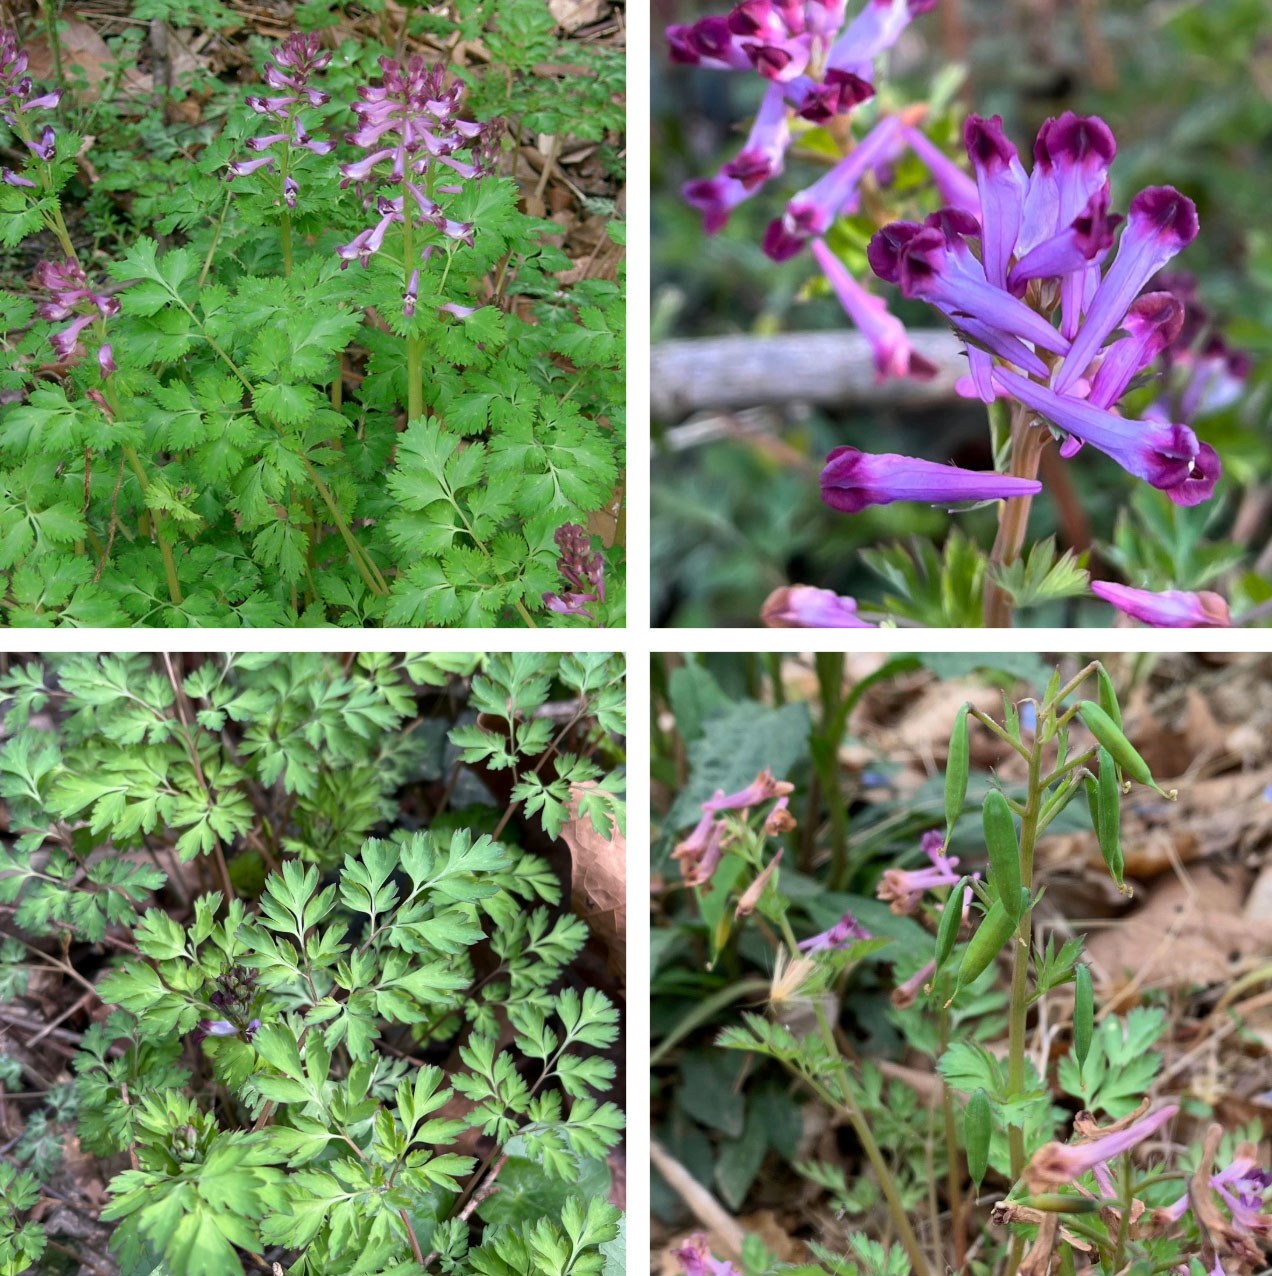 Collage of 4 plant photos showing clockwise from upperleft the leaves, flowers, seedpods, and leaves of incised fumewort